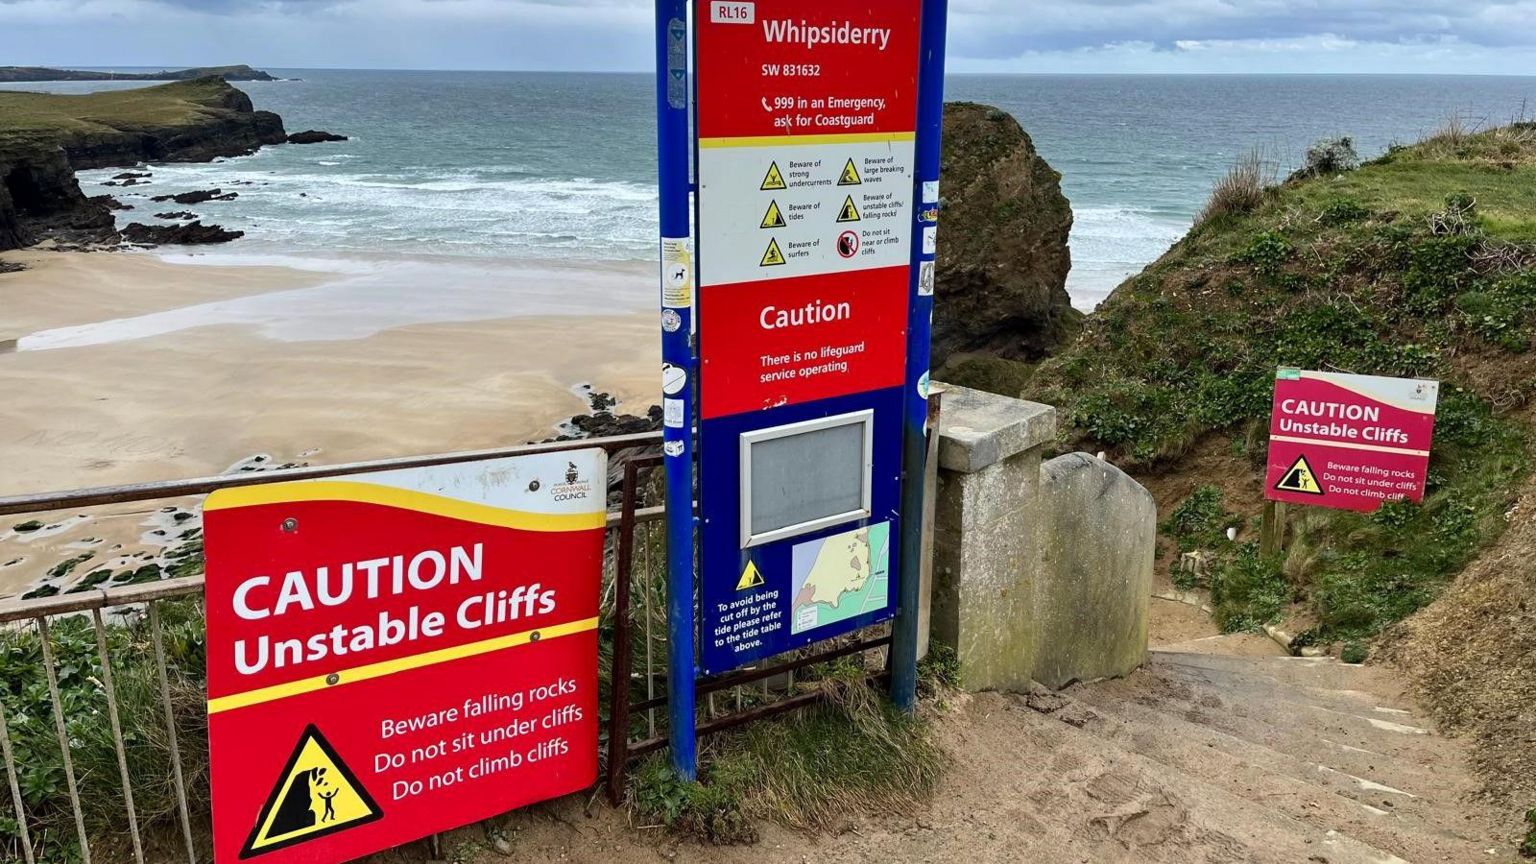 The signs at the top of the steps to Whipsiderry beach